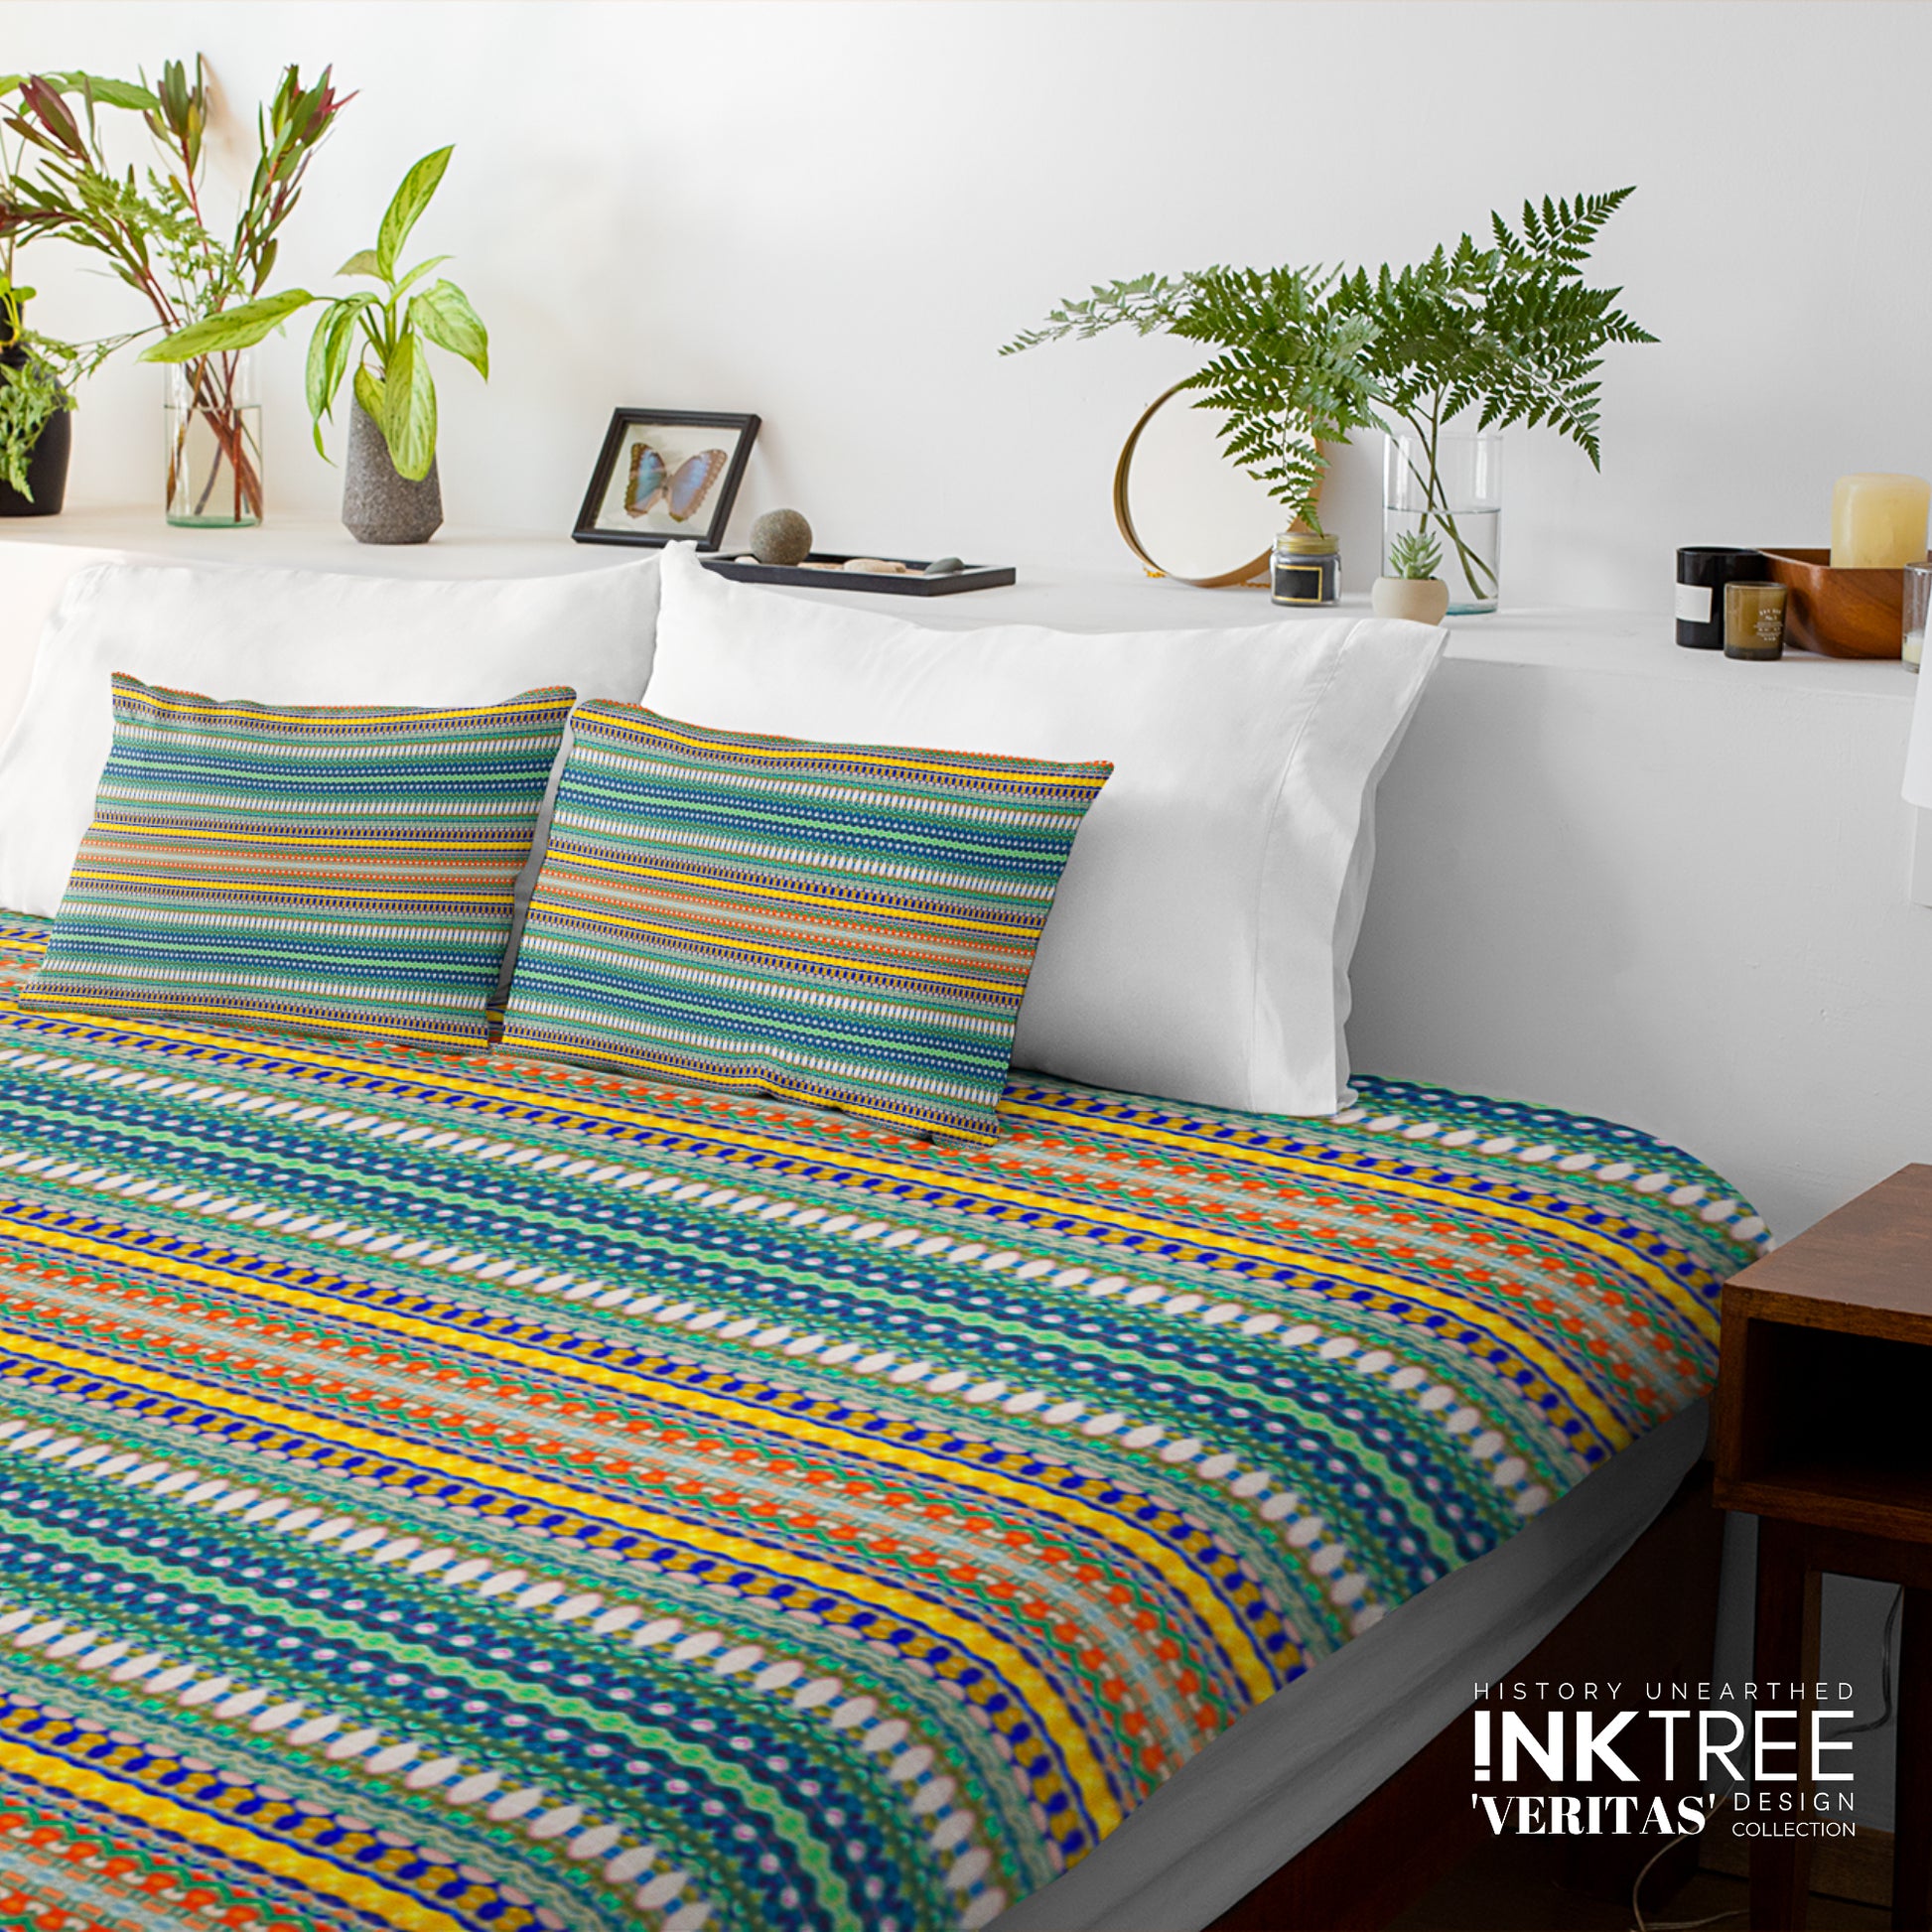 A doona cover and pillows with blue and yellow, green and orange pattern against a white wall, leaning against white pillows and green plants in vases.